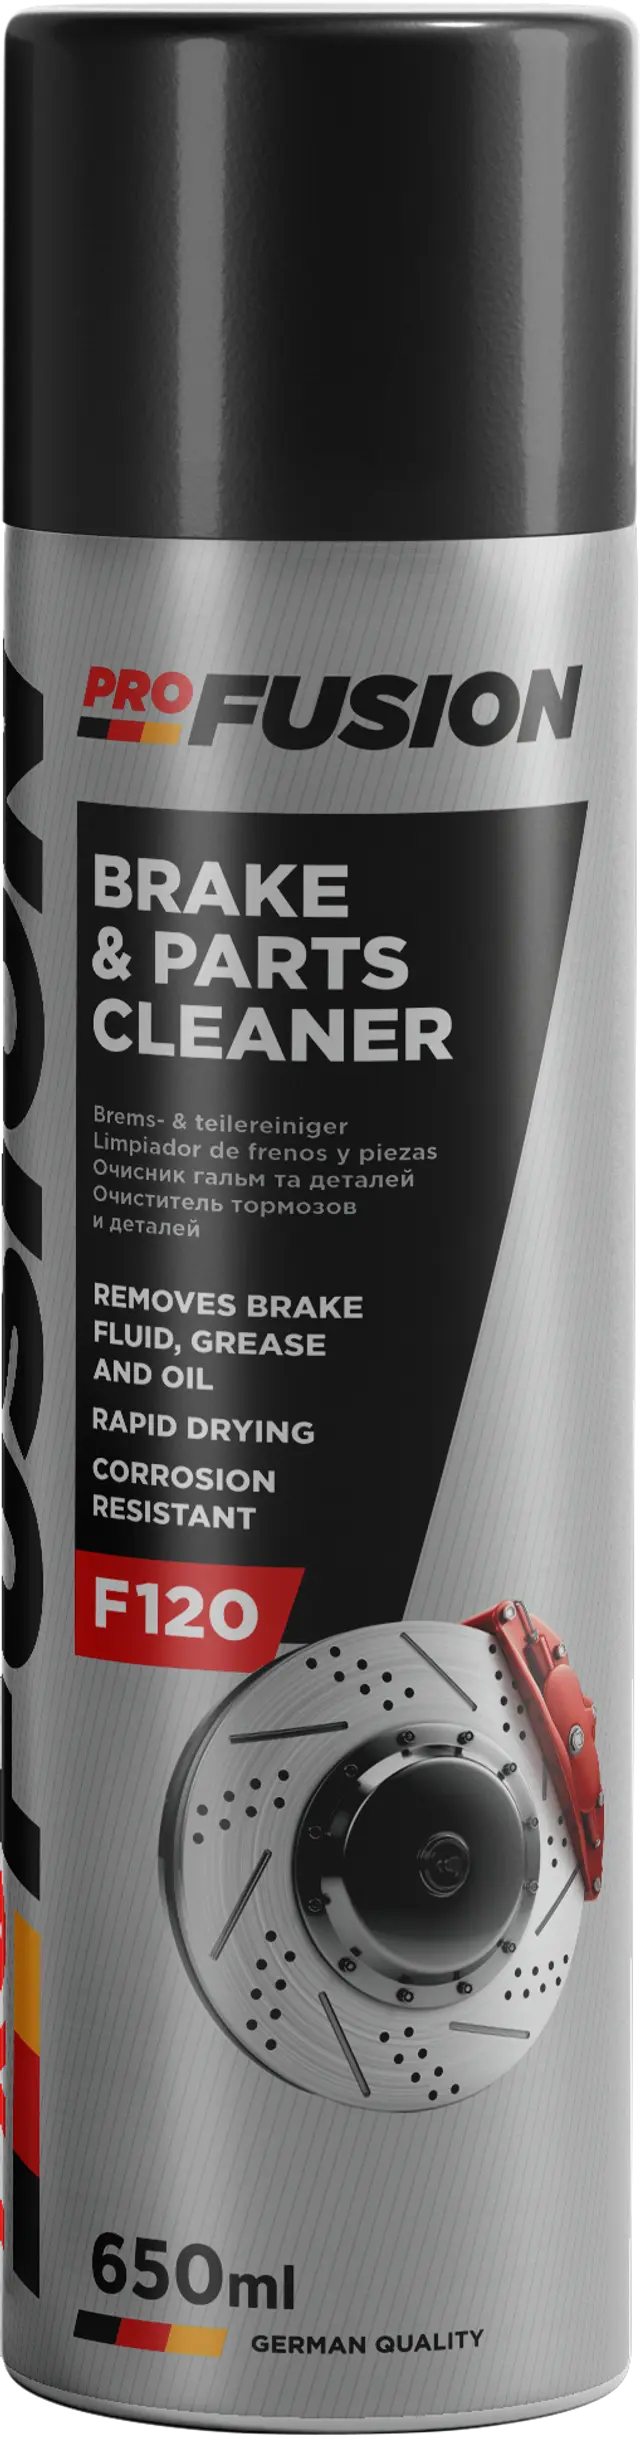 BRAKE PARTS CLEANER 650ML, LIMPIA F